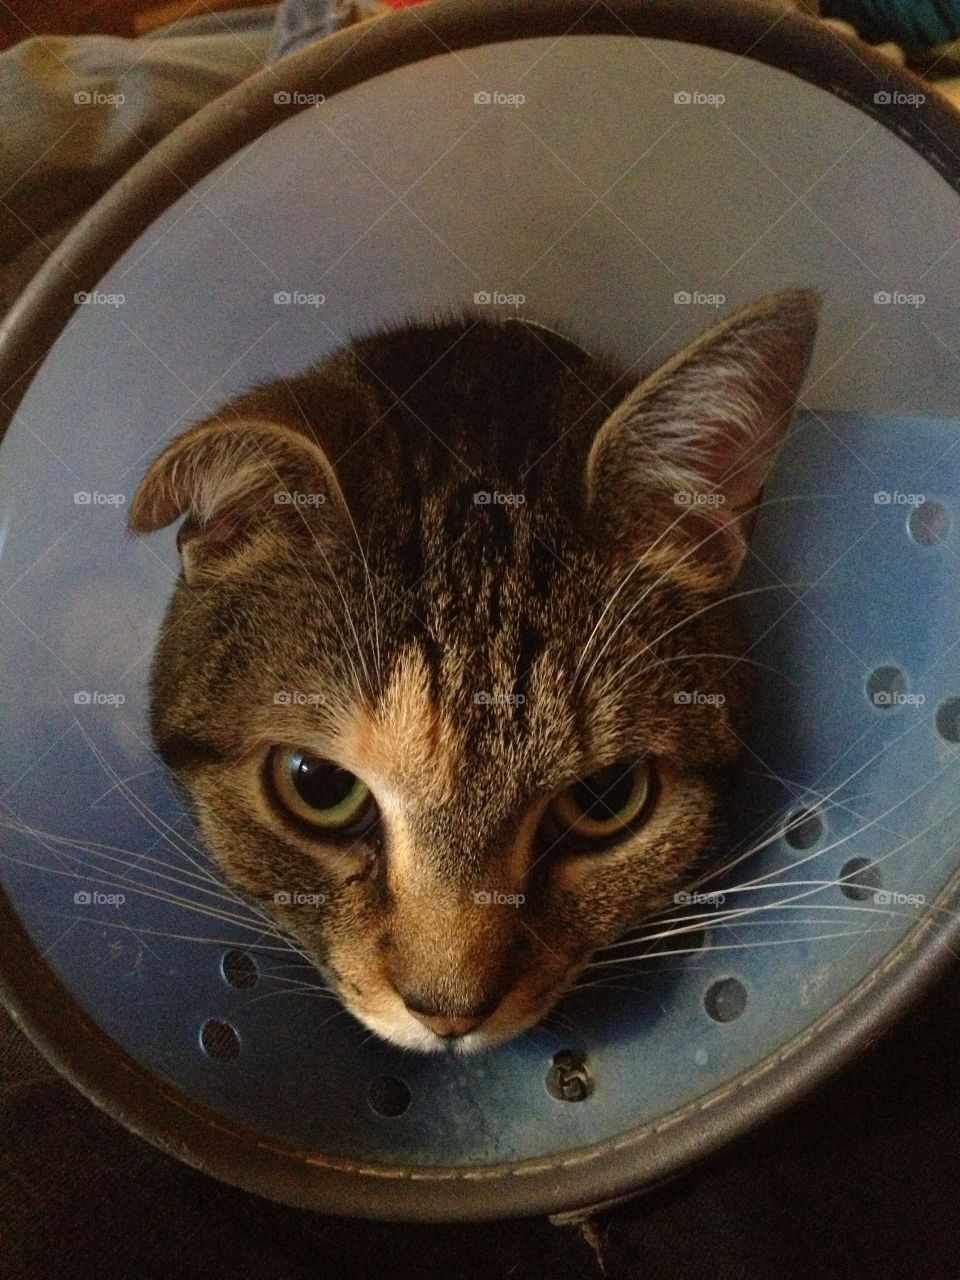 My cat, Anaya, angry about her cone.